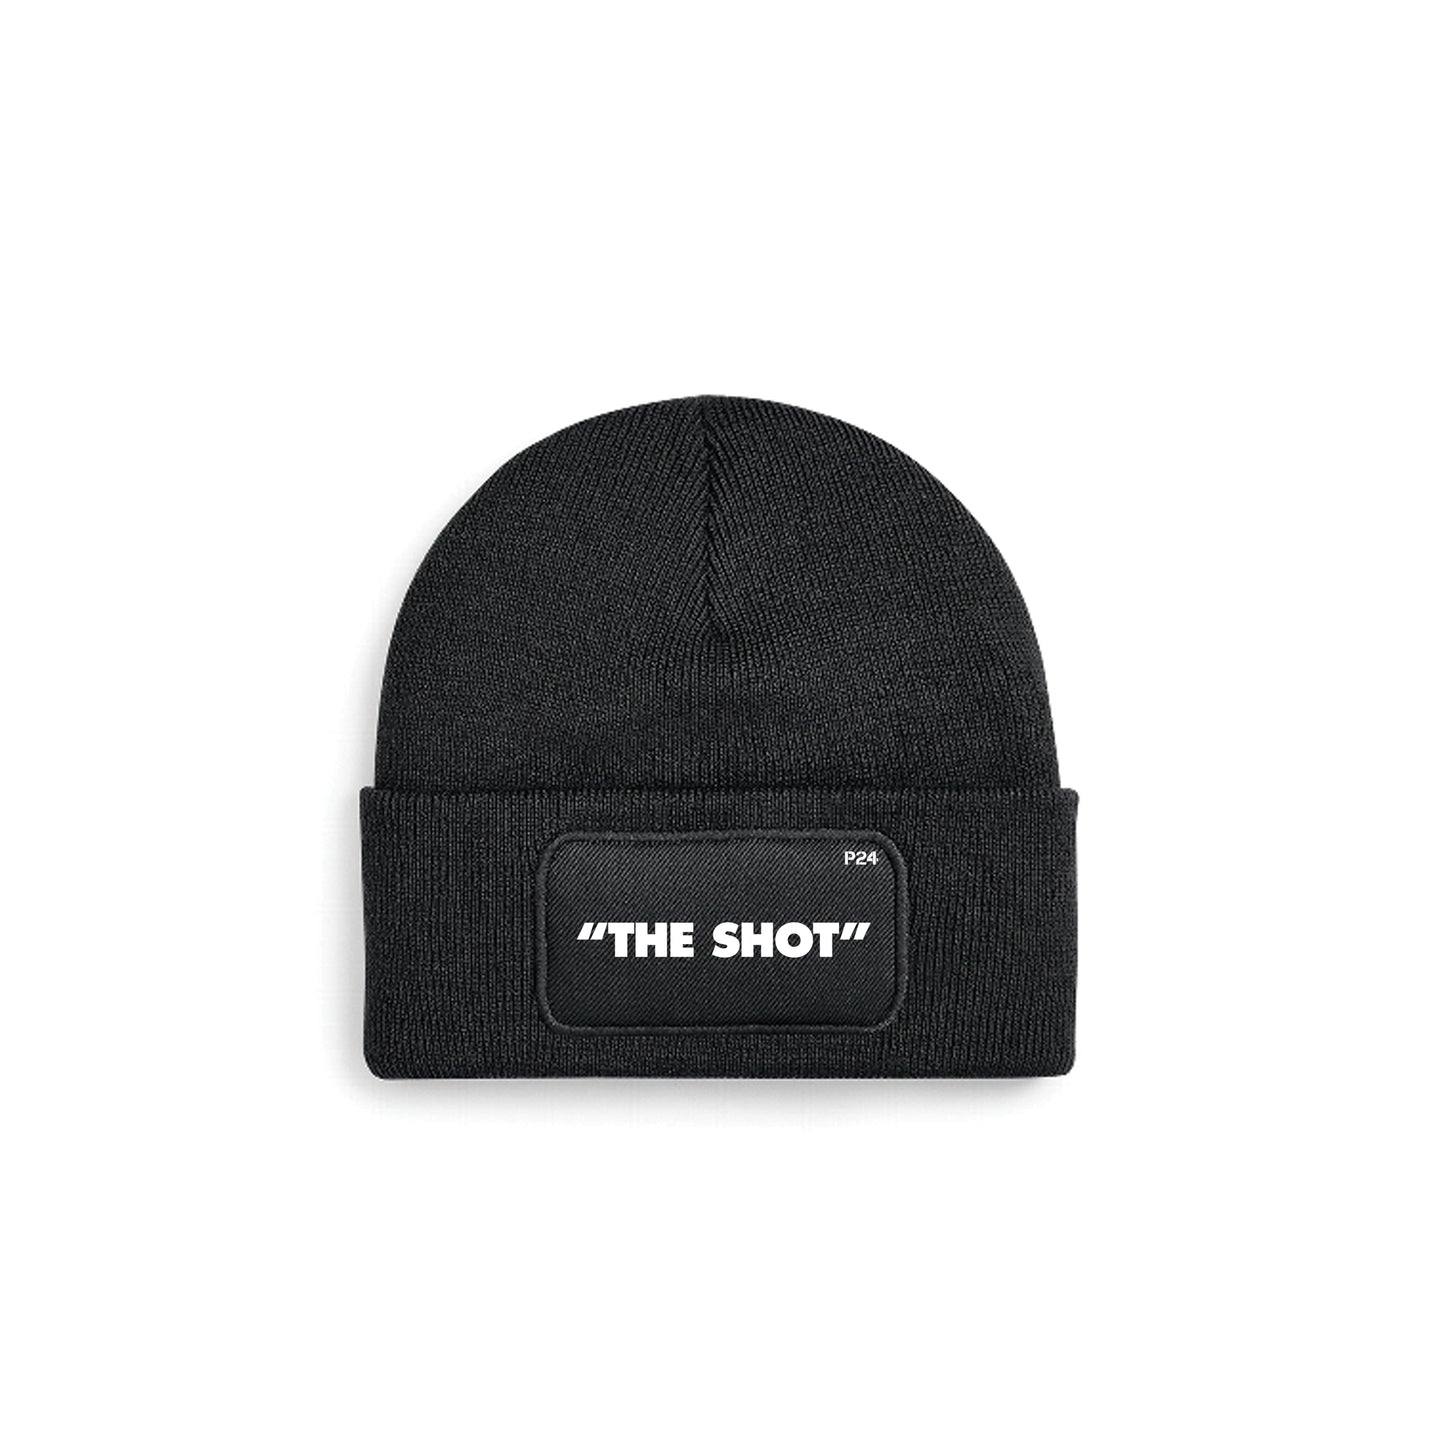 "The Shot" beanie PARALLELO24